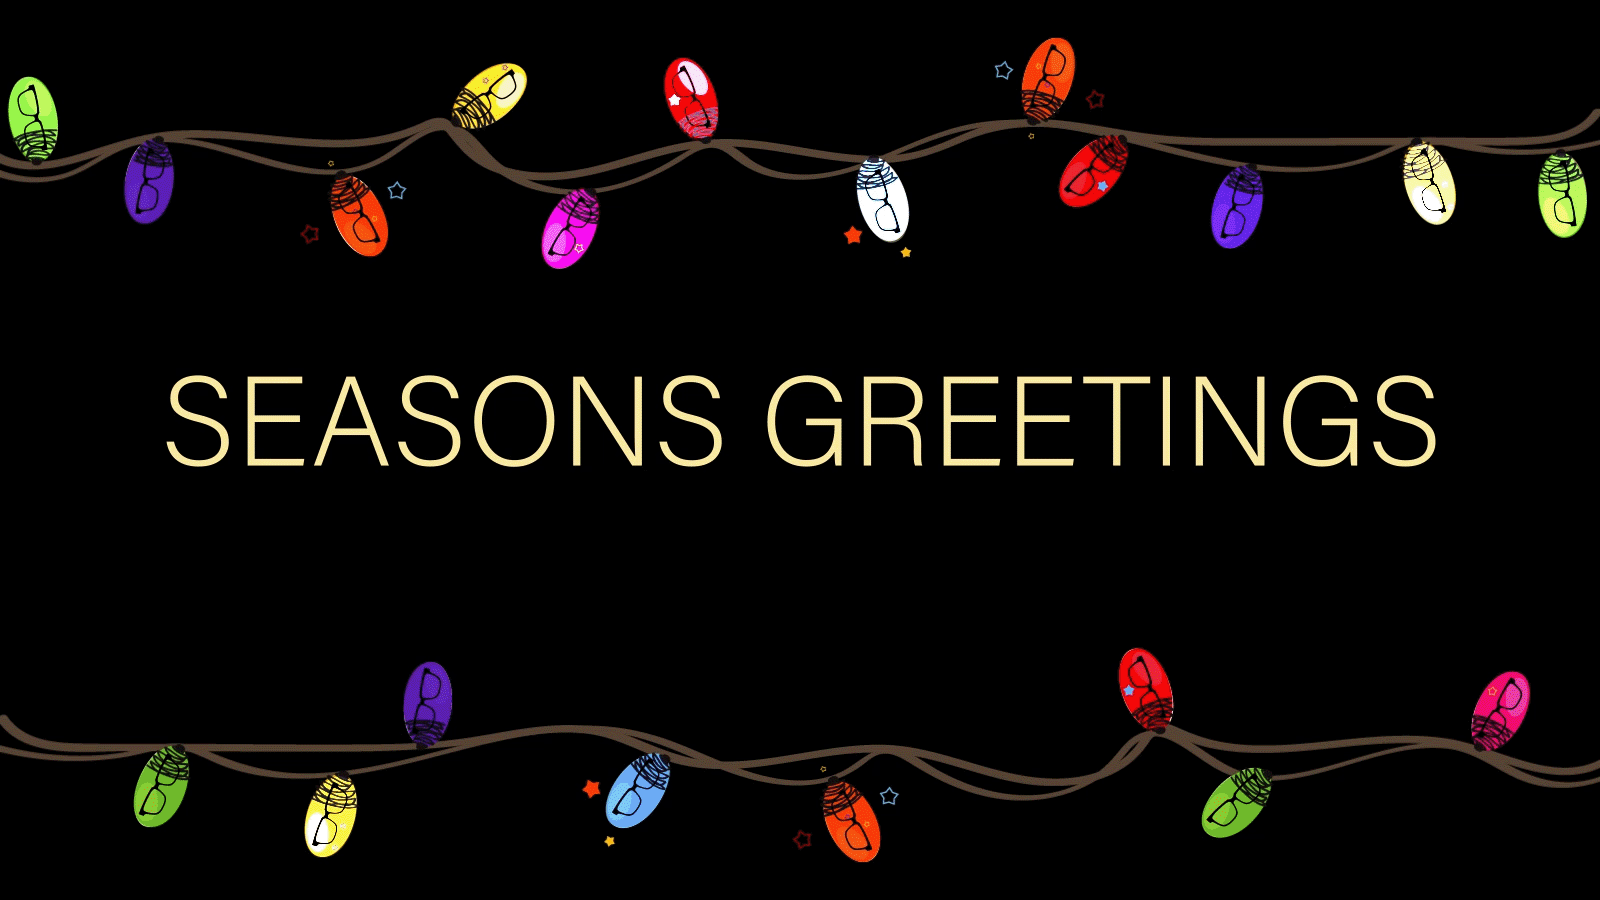 Warm Wishes for a Festive Holiday Season!